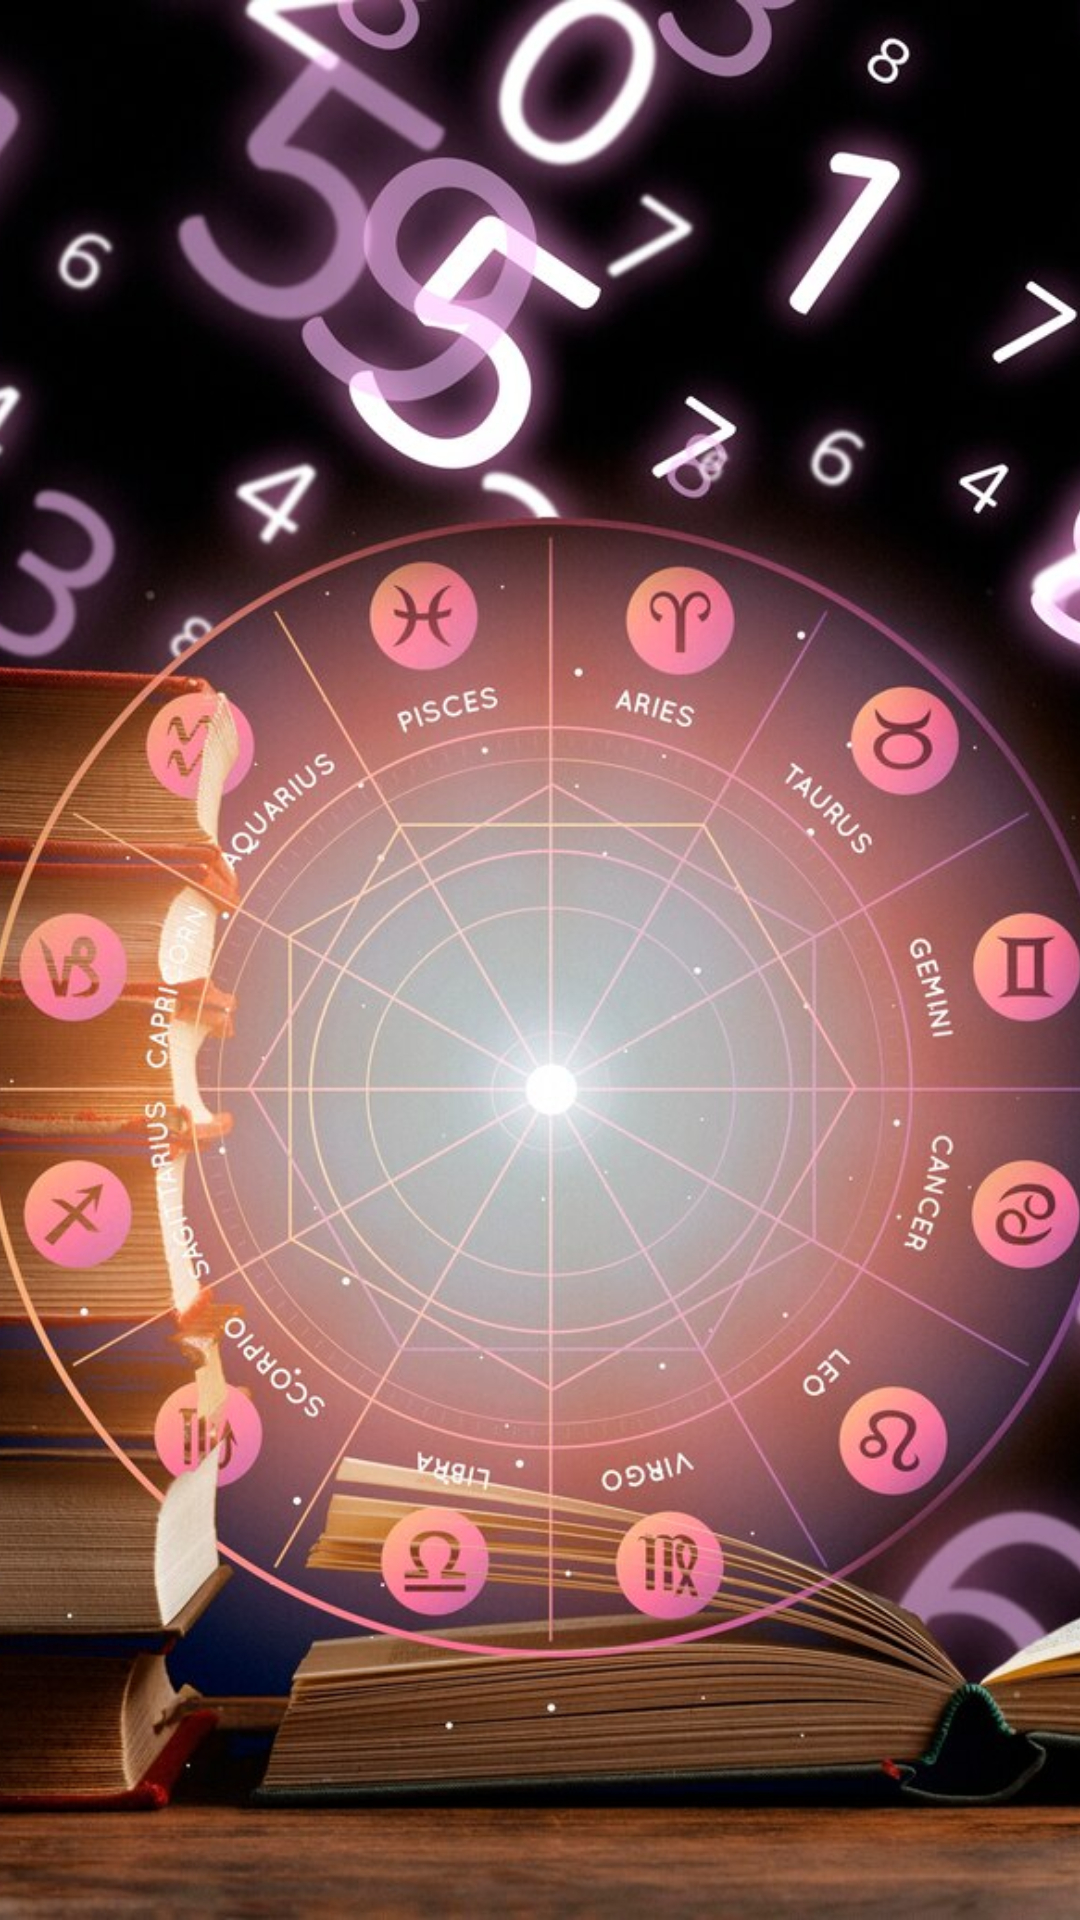 Know lucky colour, number for all zodiac signs for horoscope March 11